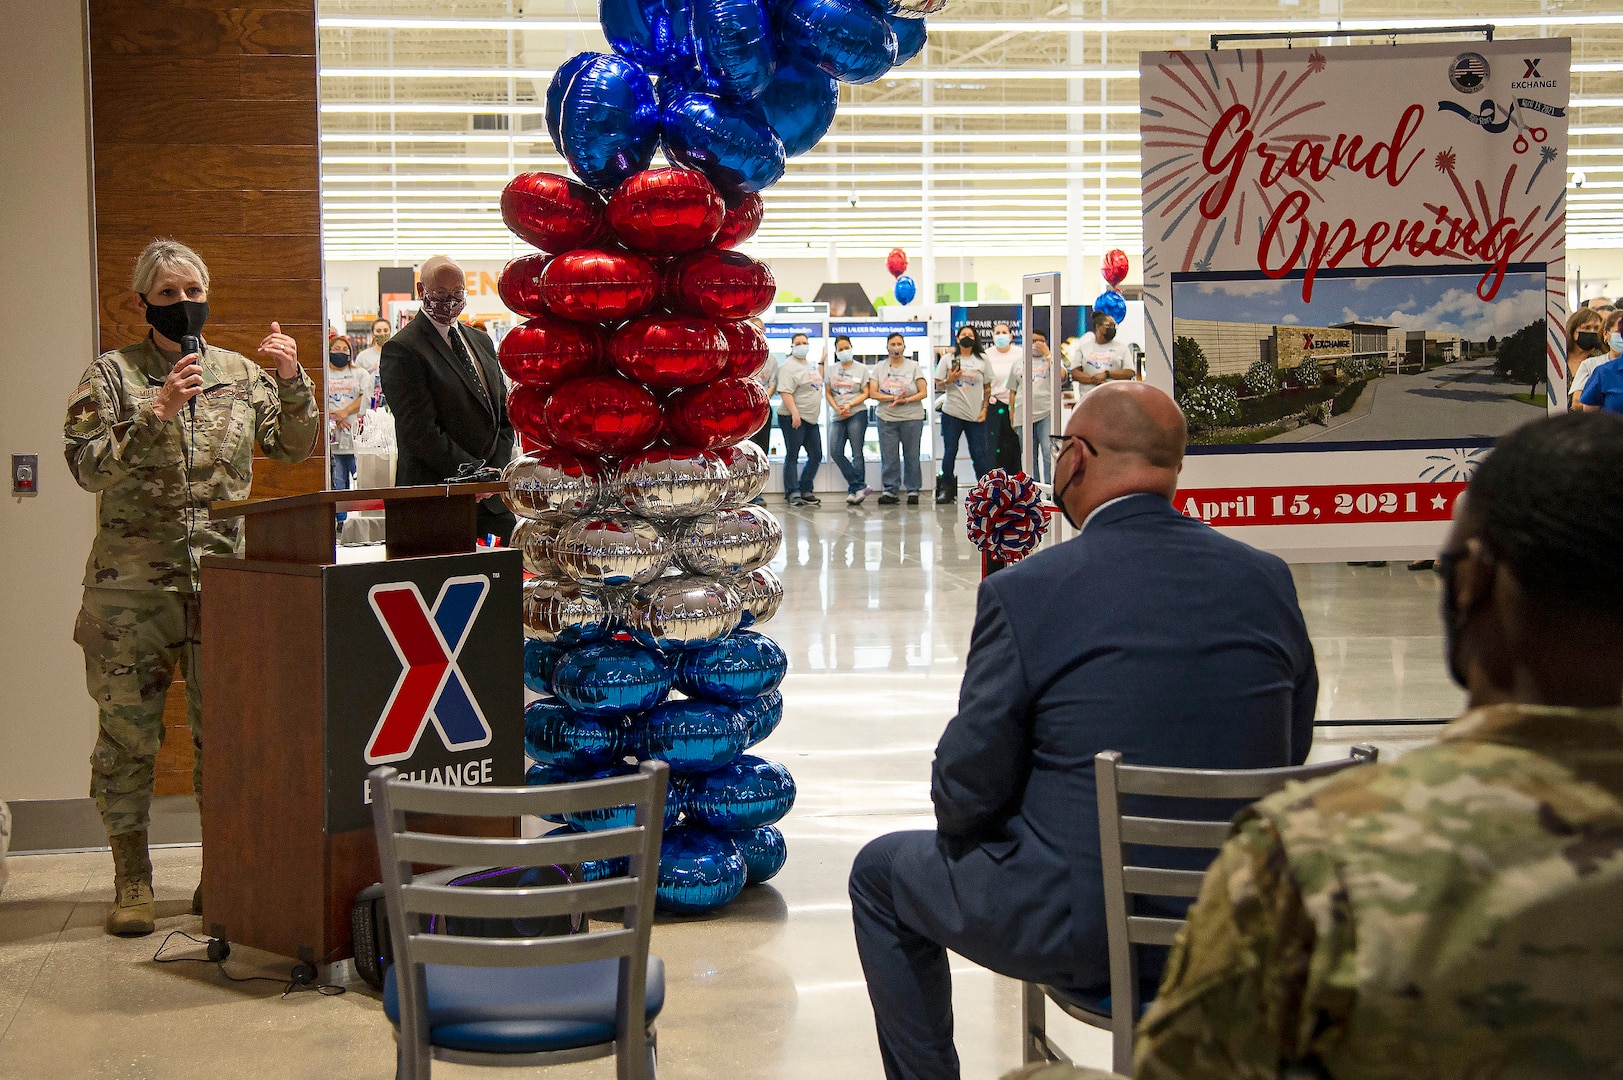 Brig. Gen. Caroline Miller, 502nd Air Base Wing and Joint Base San Antonio commander, speaks to attendees at the grand opening and ribbon cutting for the new 210,000-square-foot Exchange center located on JBSA-Fort Sam Houston April 15.